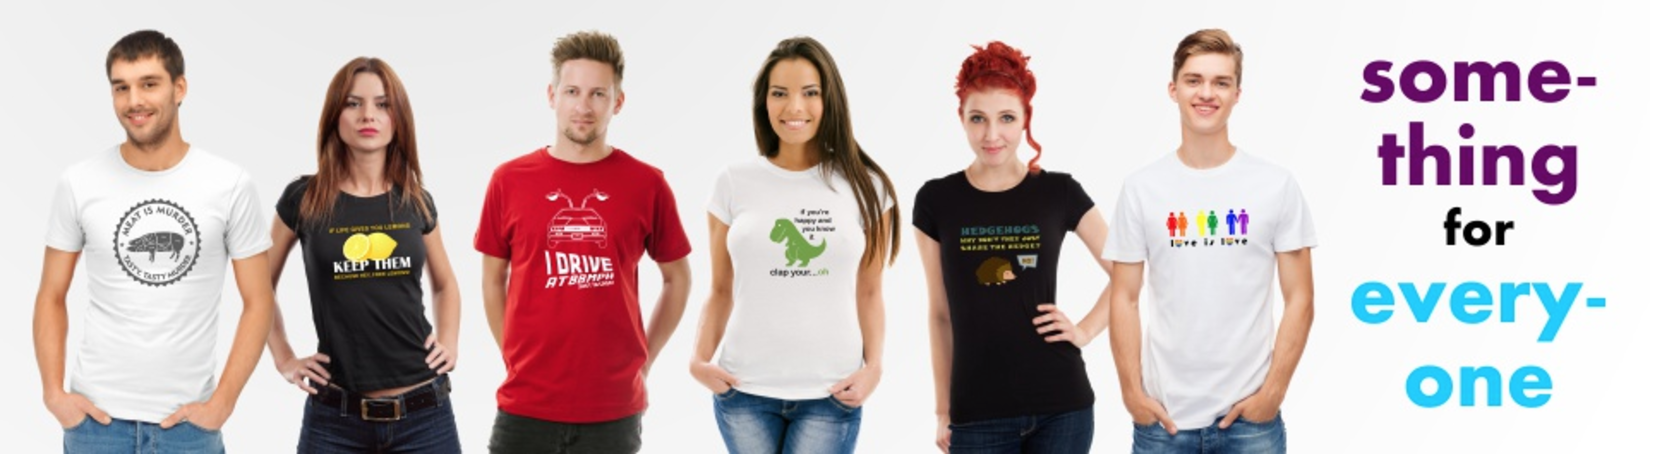 JuiceBubble South African T-shirts